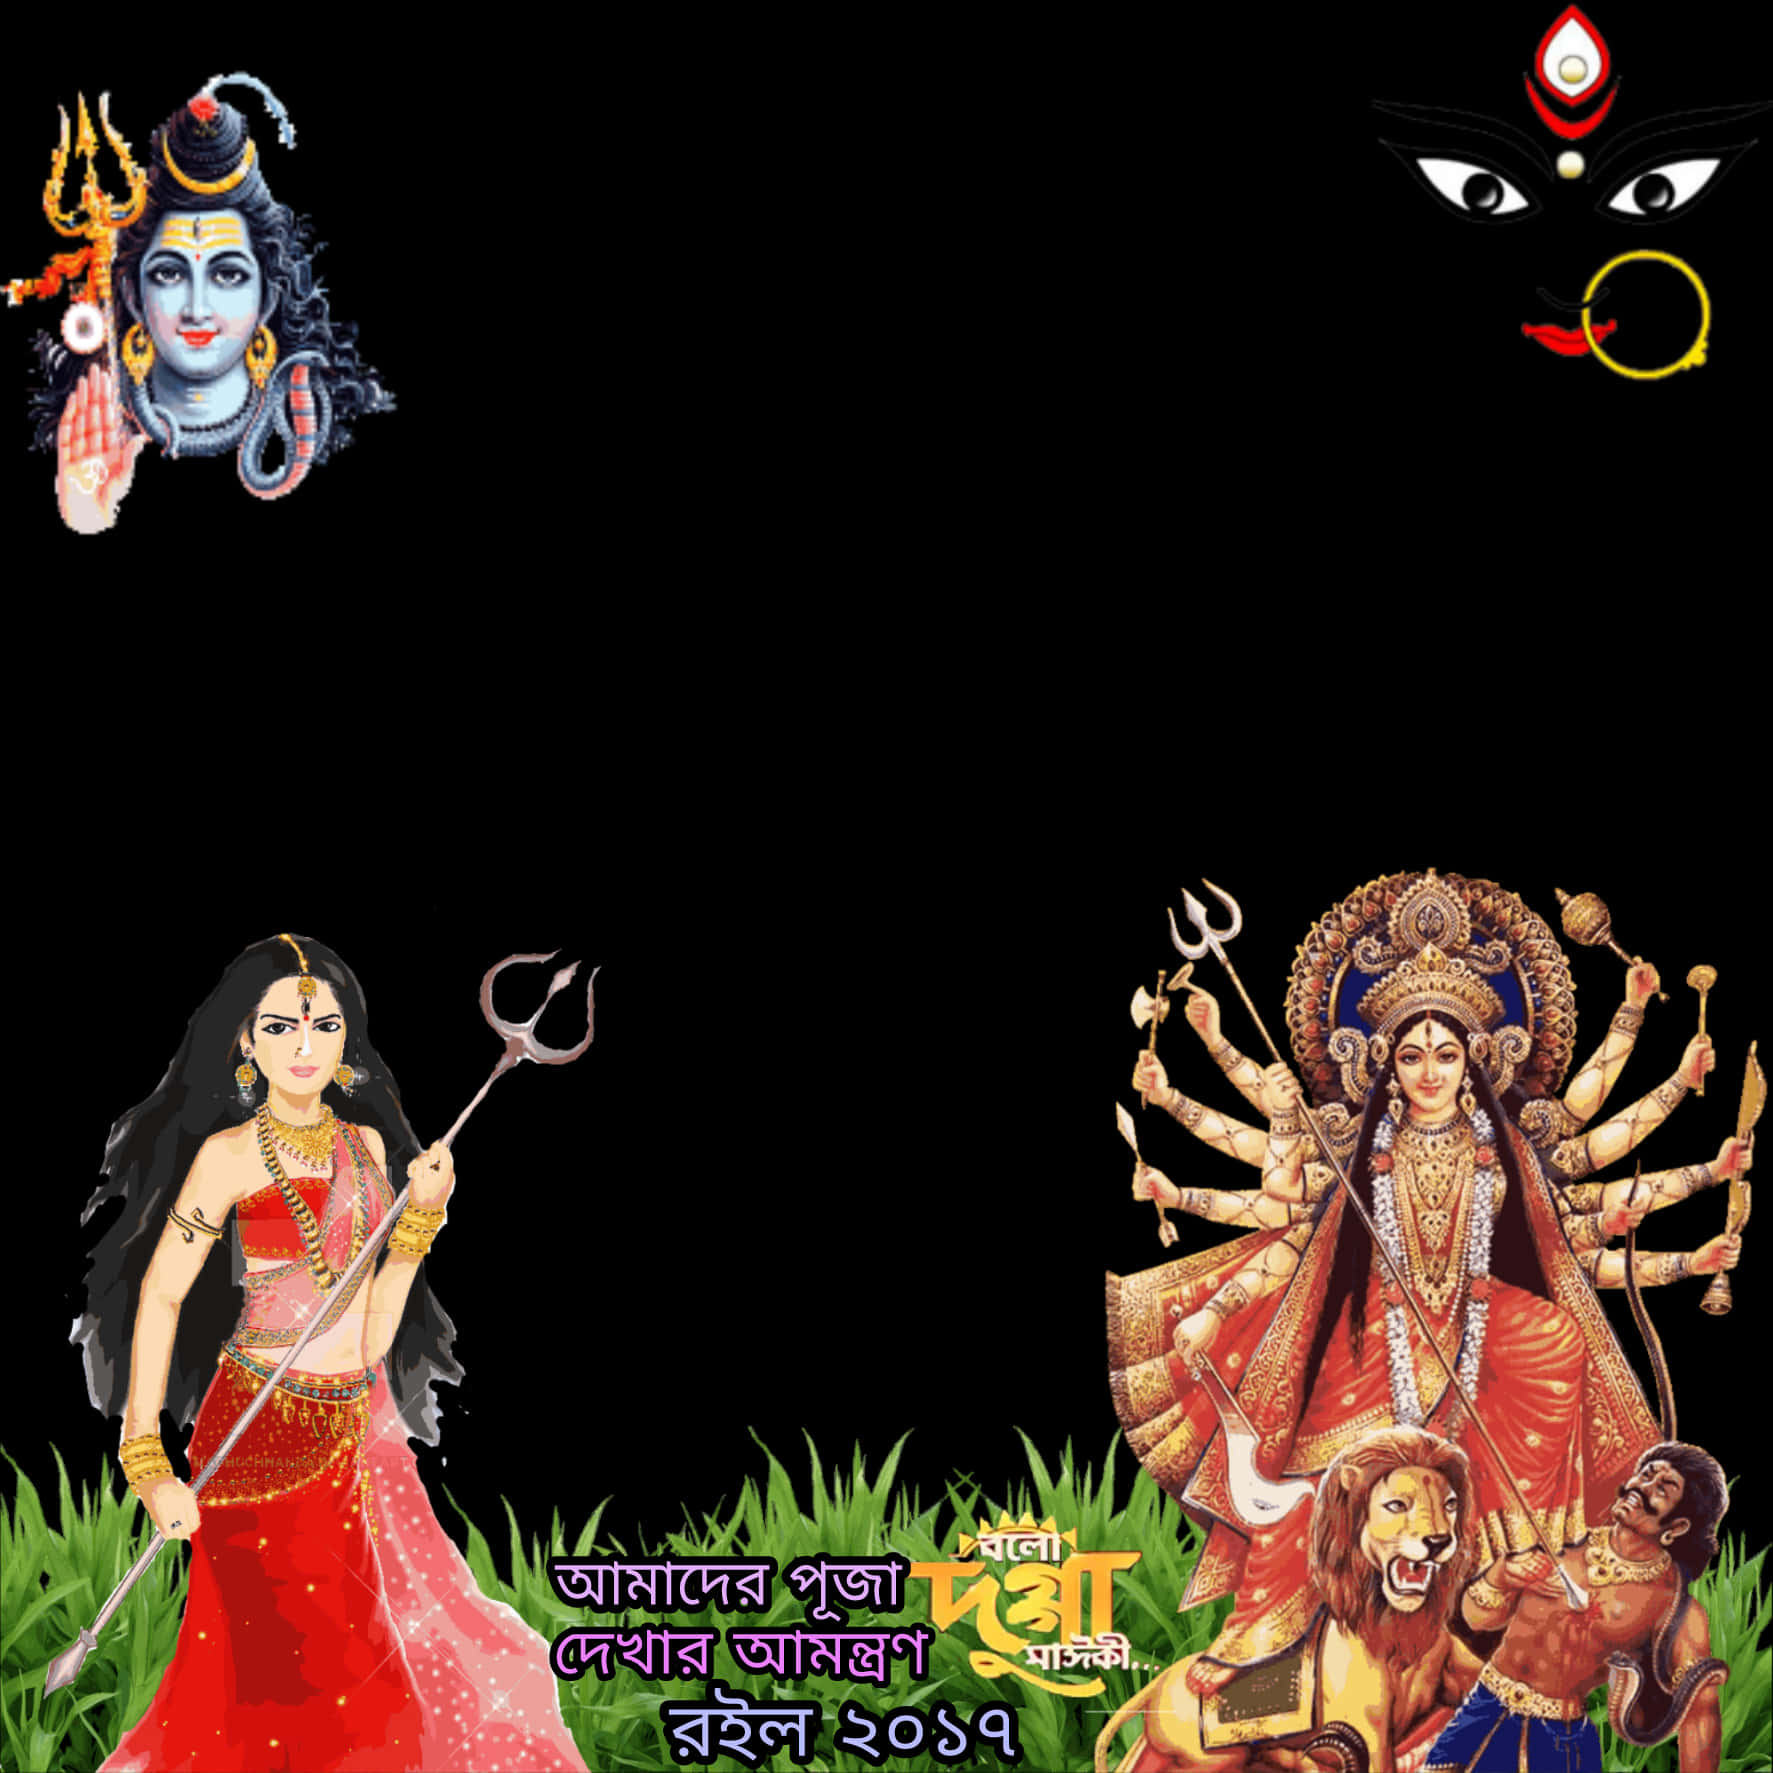 A Group Of Images Of Goddesses And A Lion